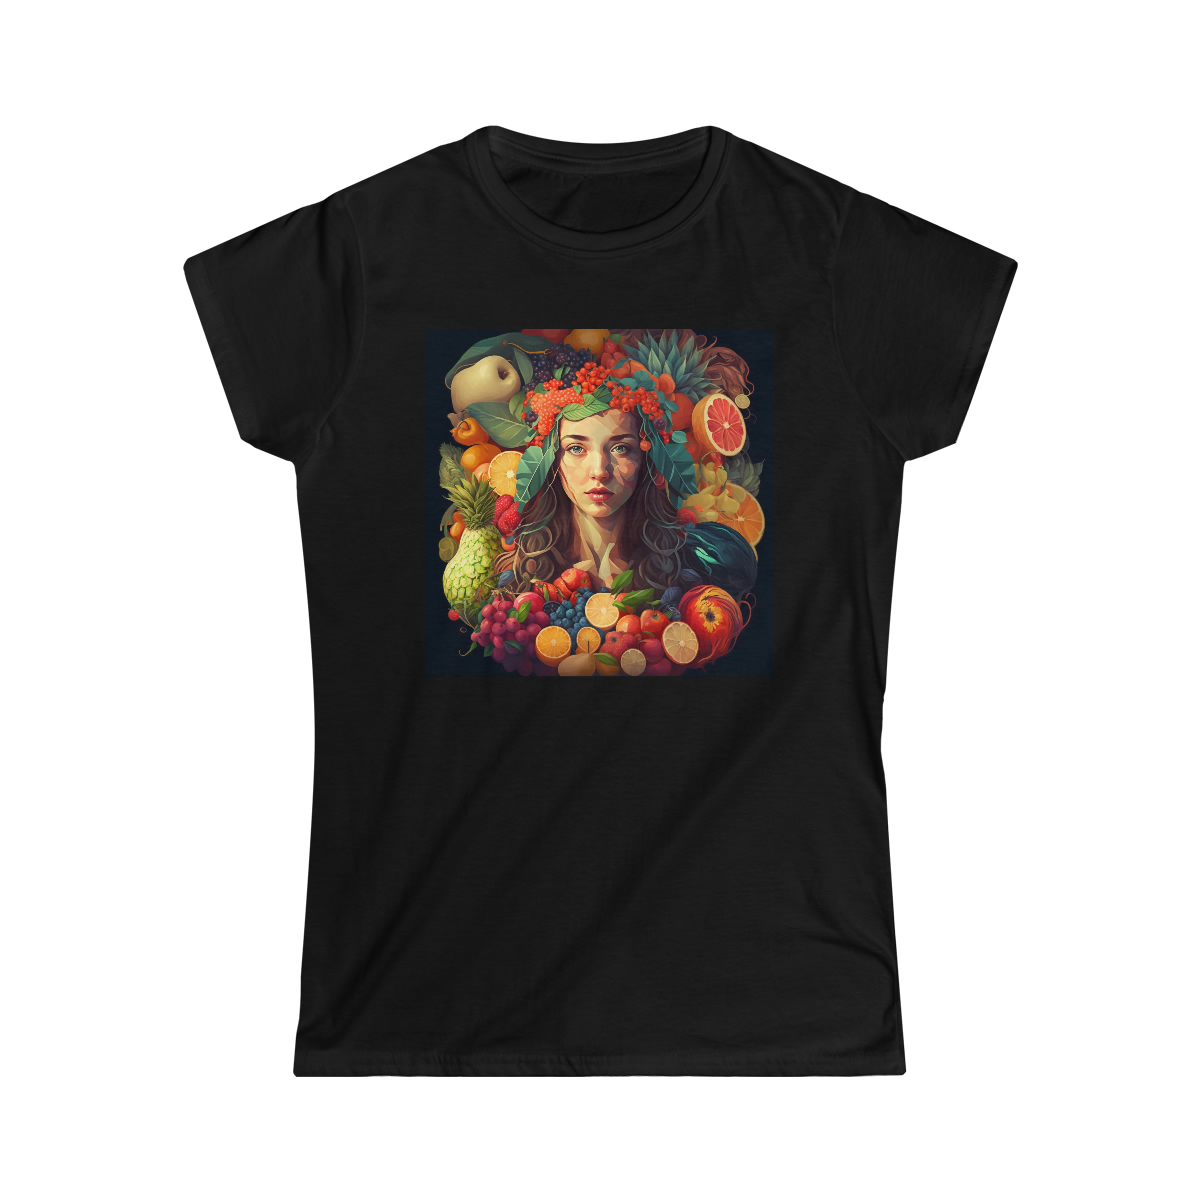 “Plant-Powered and Proud” Women’s Tee with Vegan Woman Surrounded by Fruits and Veggies